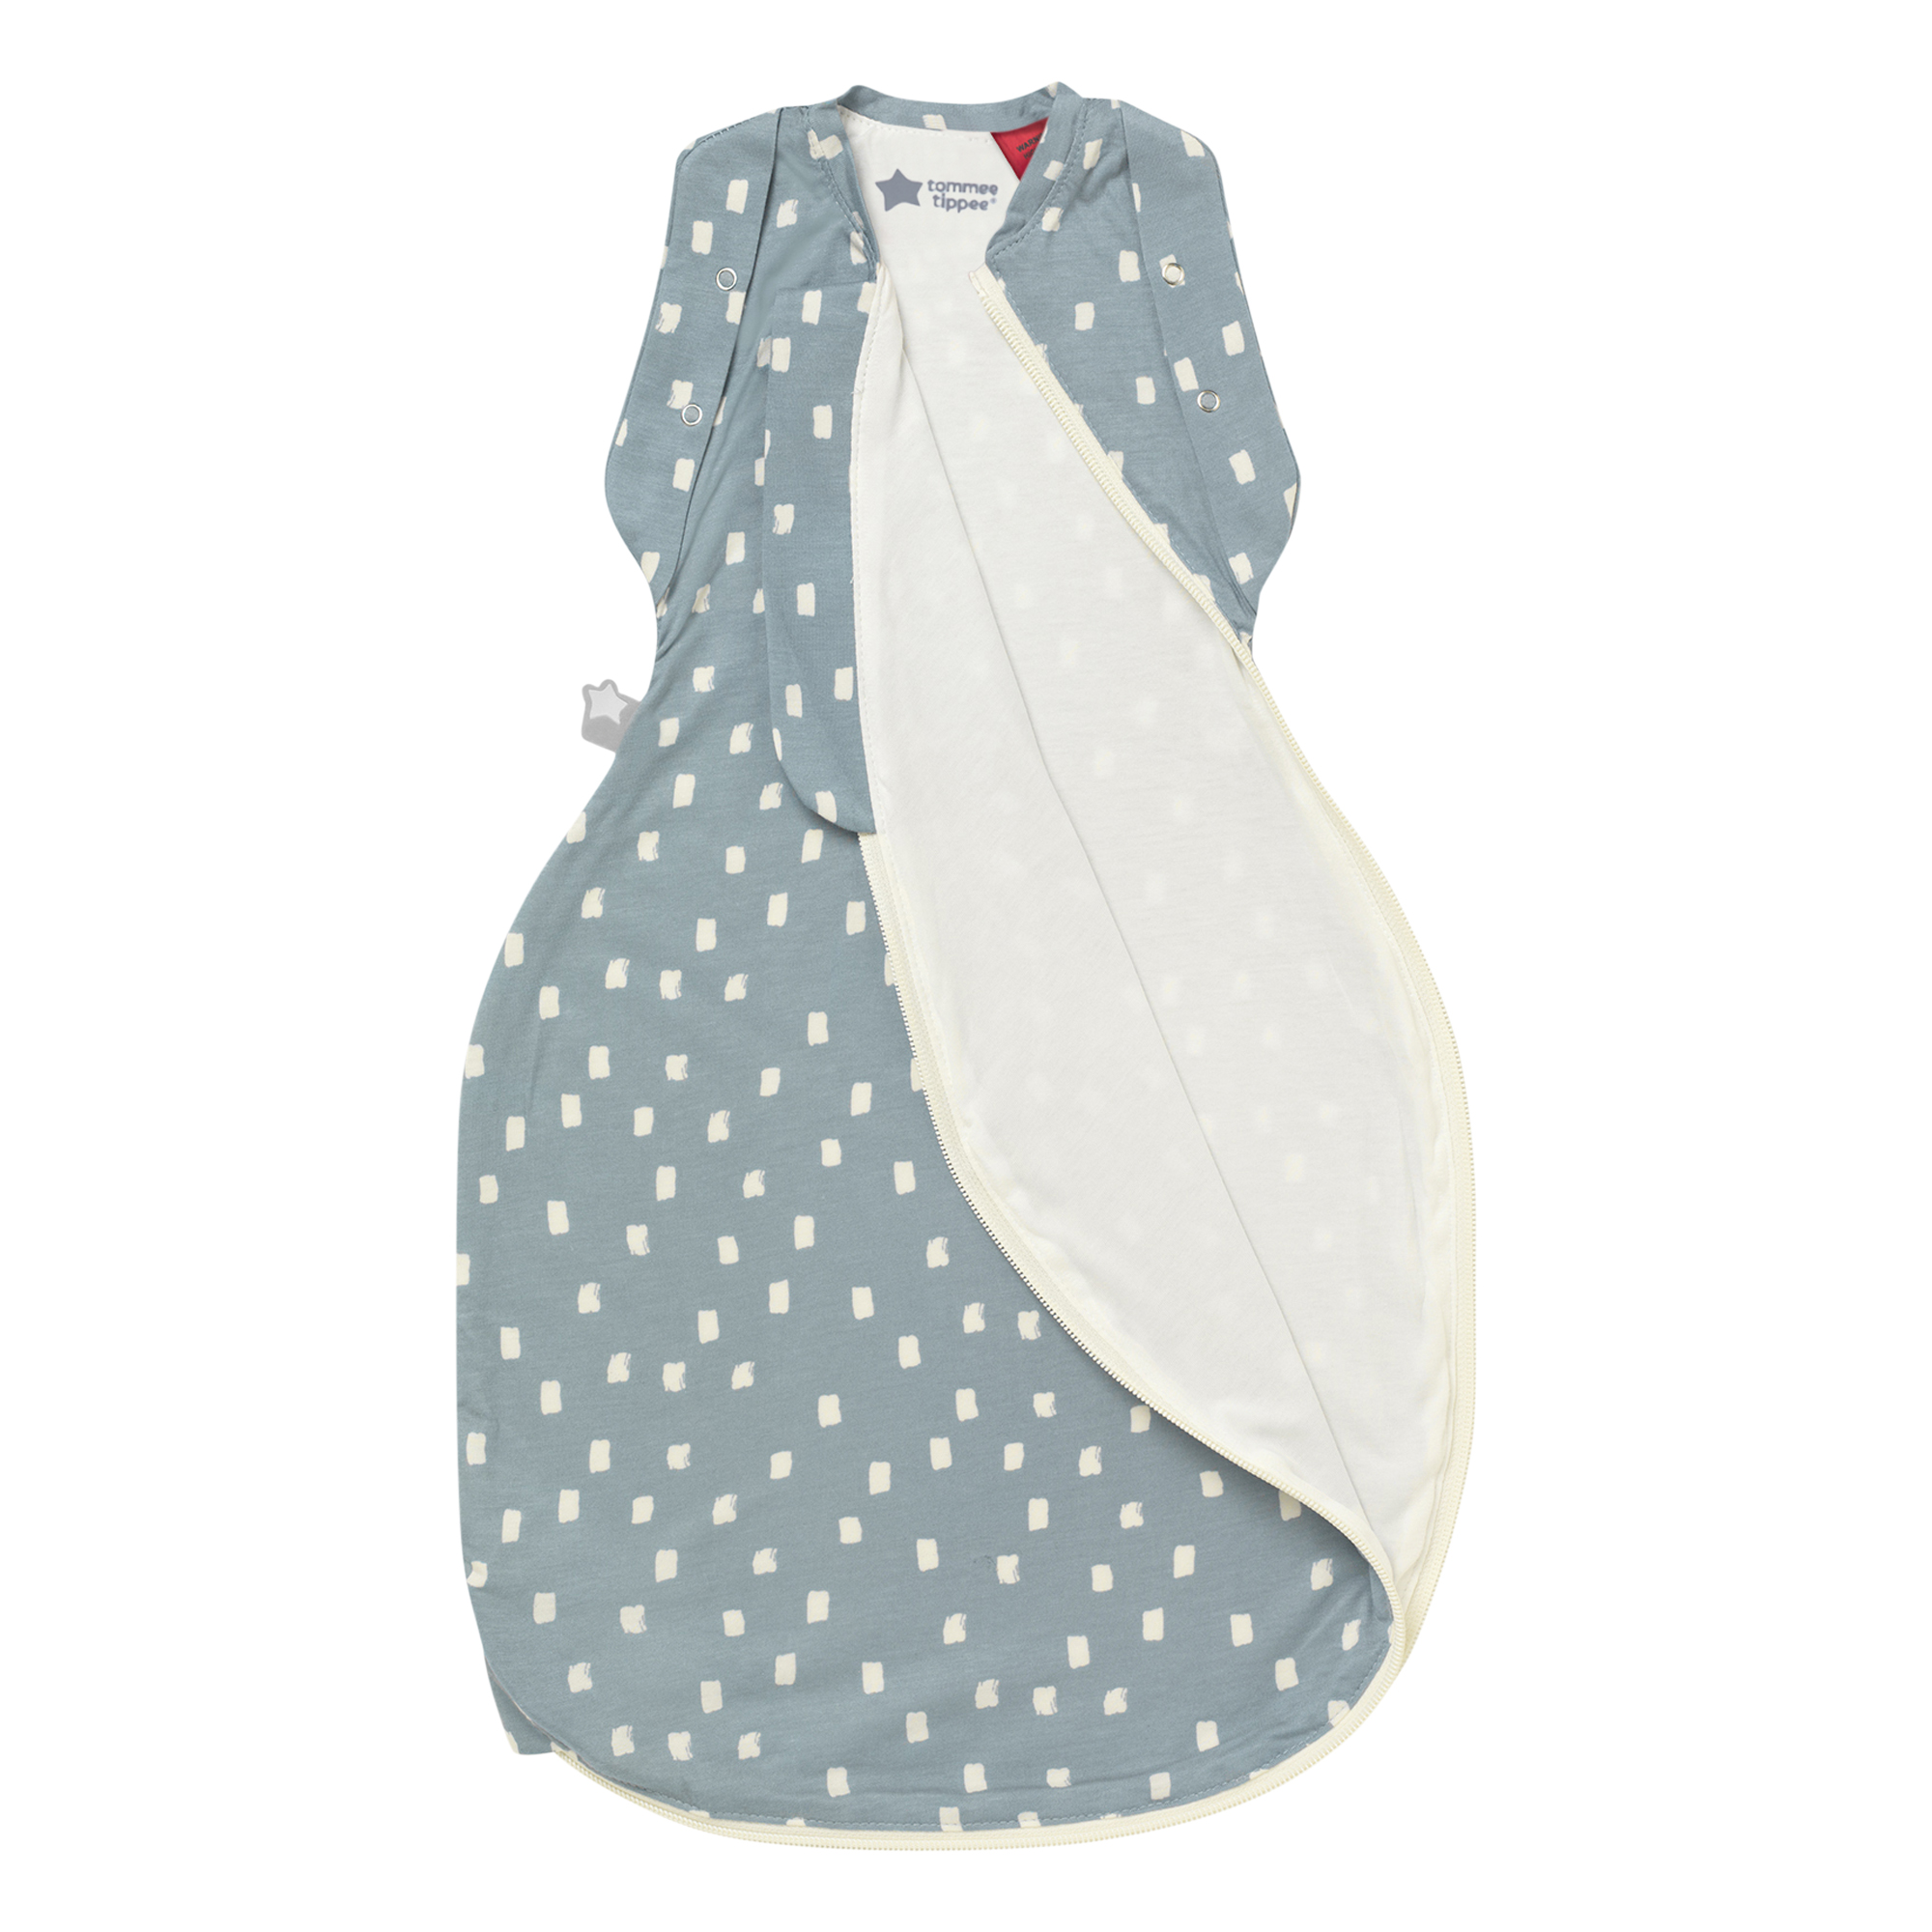 Gro υπνόσακος swaddle bag χειμερινός 2.5 tog navy speck 0-3 μηνών - The Gro Company